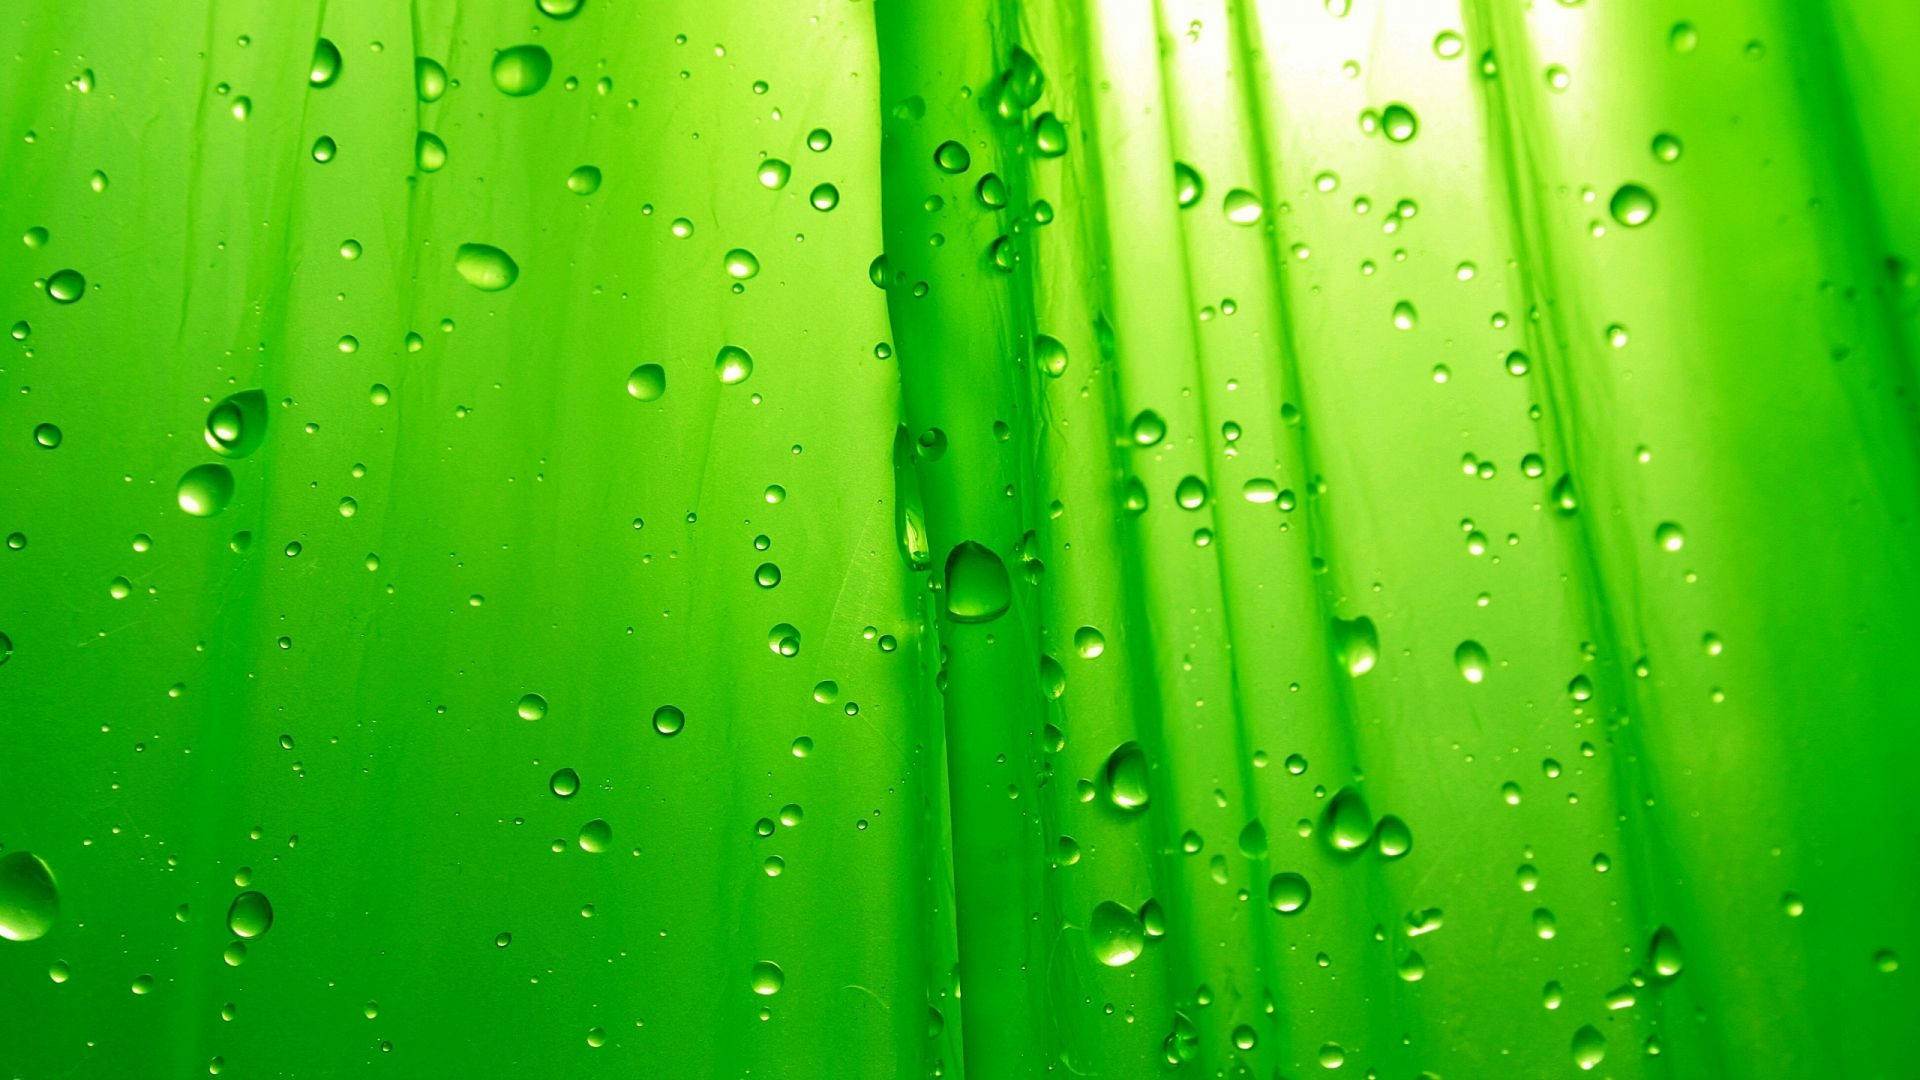 HD Green Backgrounds Wallpapers High Quality Wallpapers 1920x1080